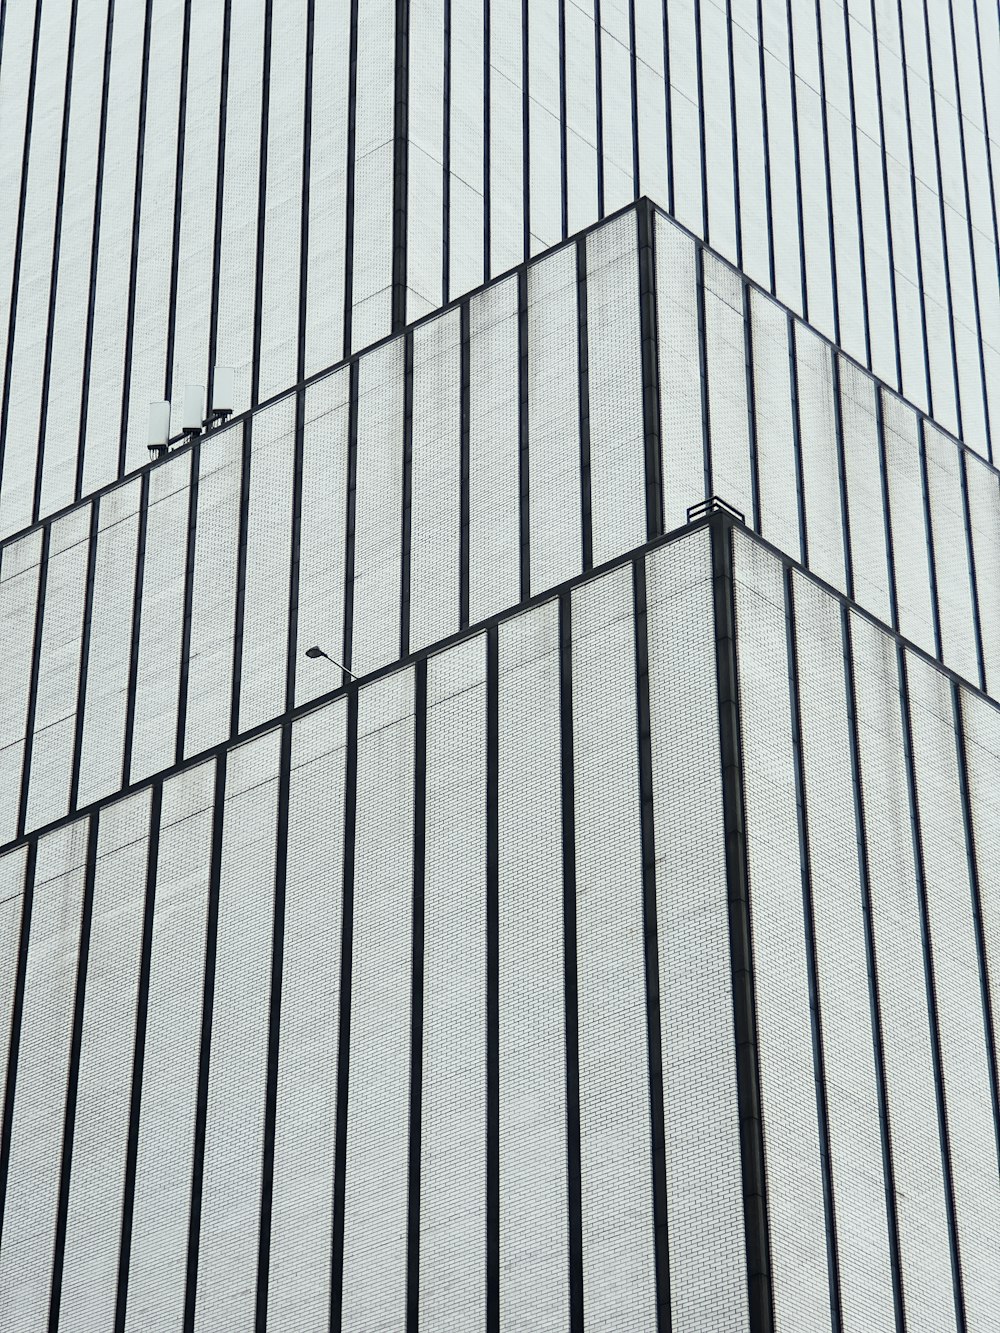 a bird is perched on the side of a tall building